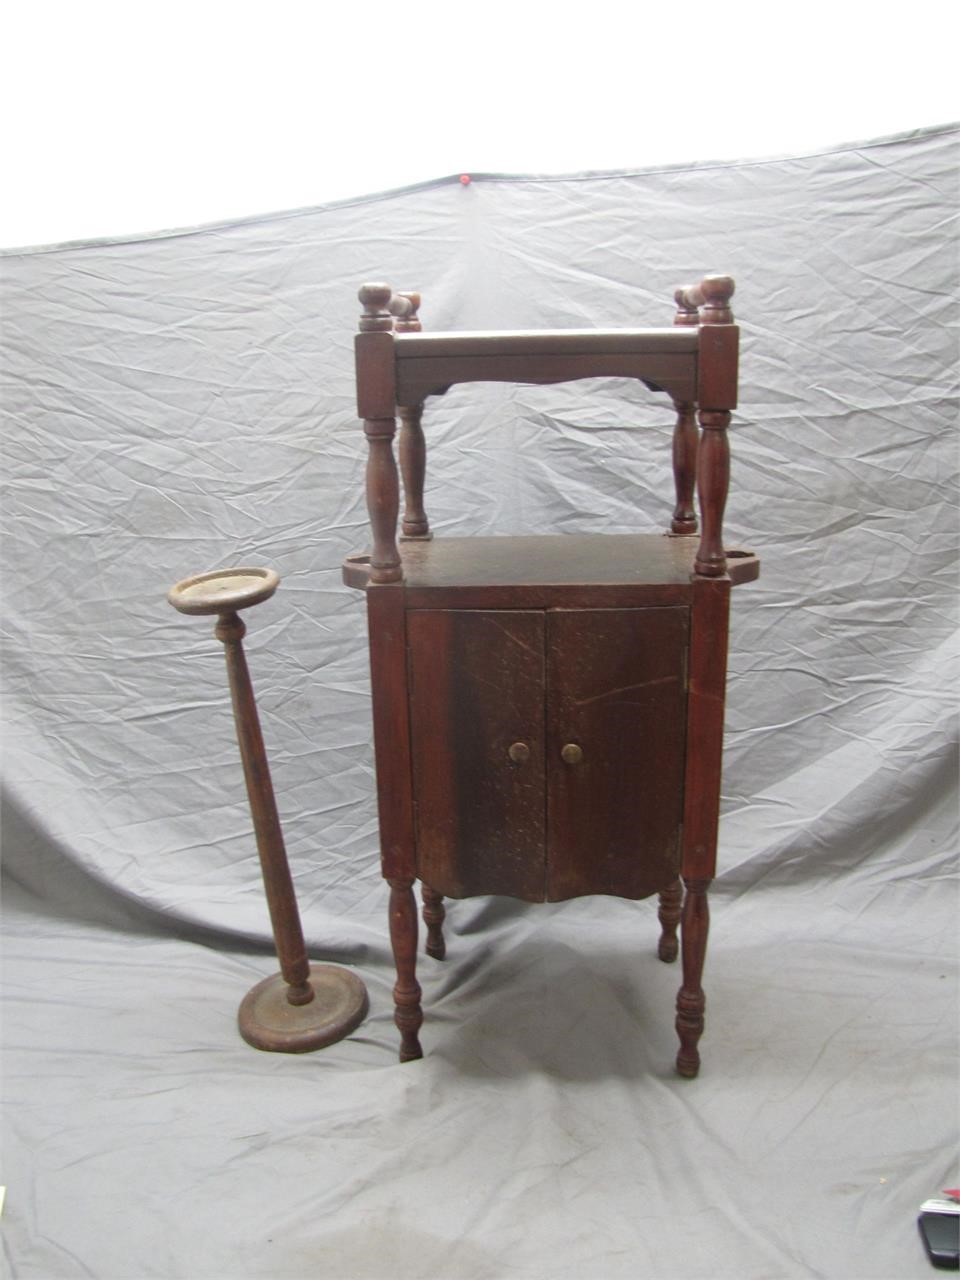 Antique Wooden Smokers Pipe Cabinet